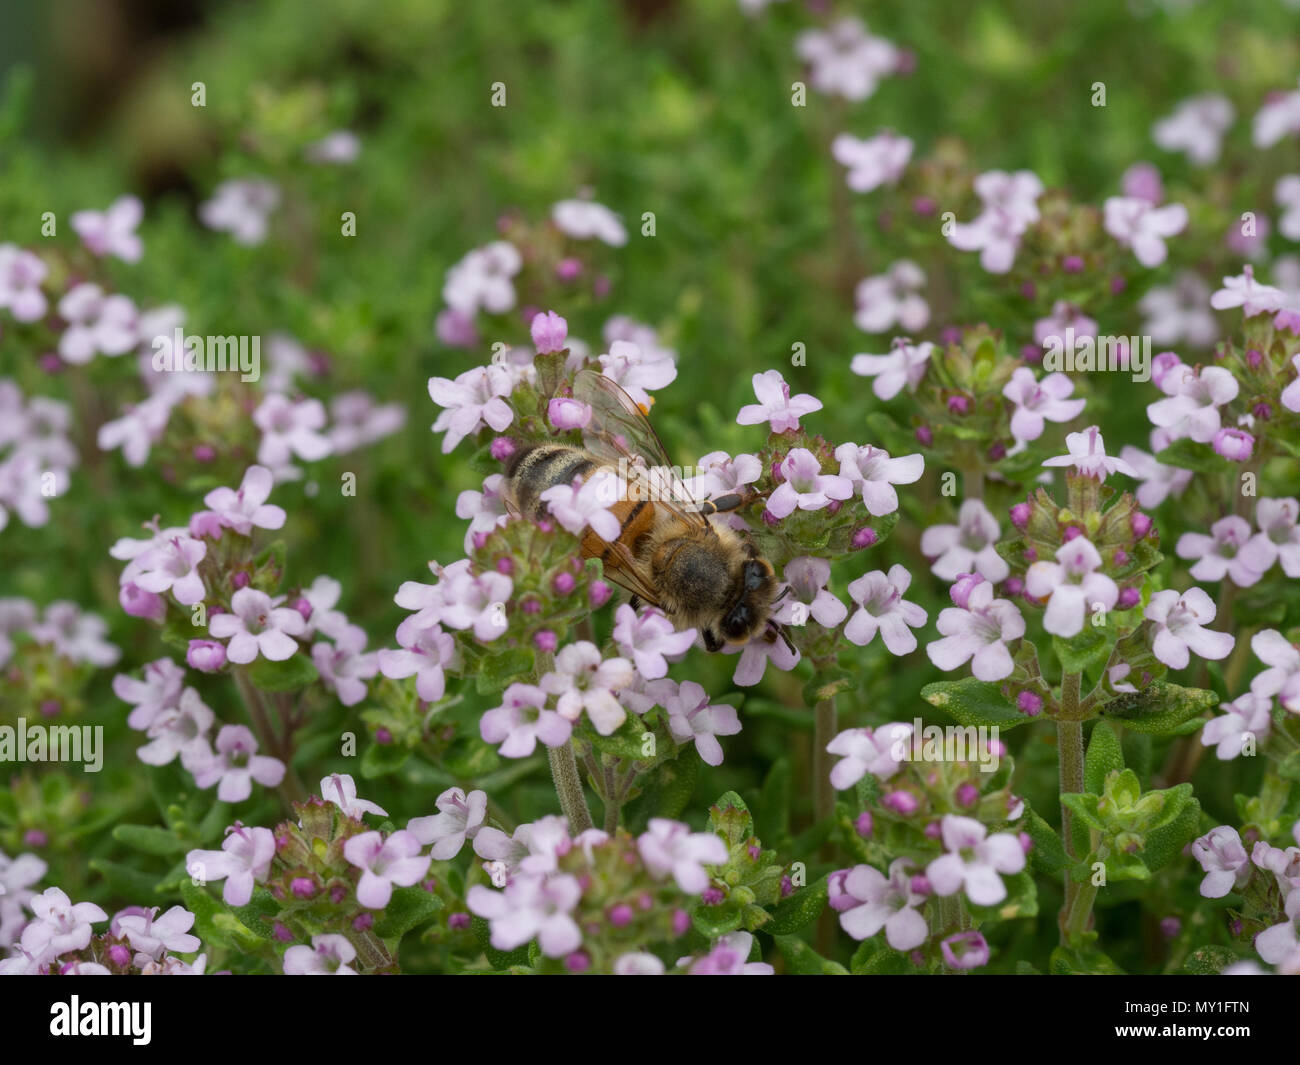 A close up of honey bees feeding on thyme flowers Stock Photo